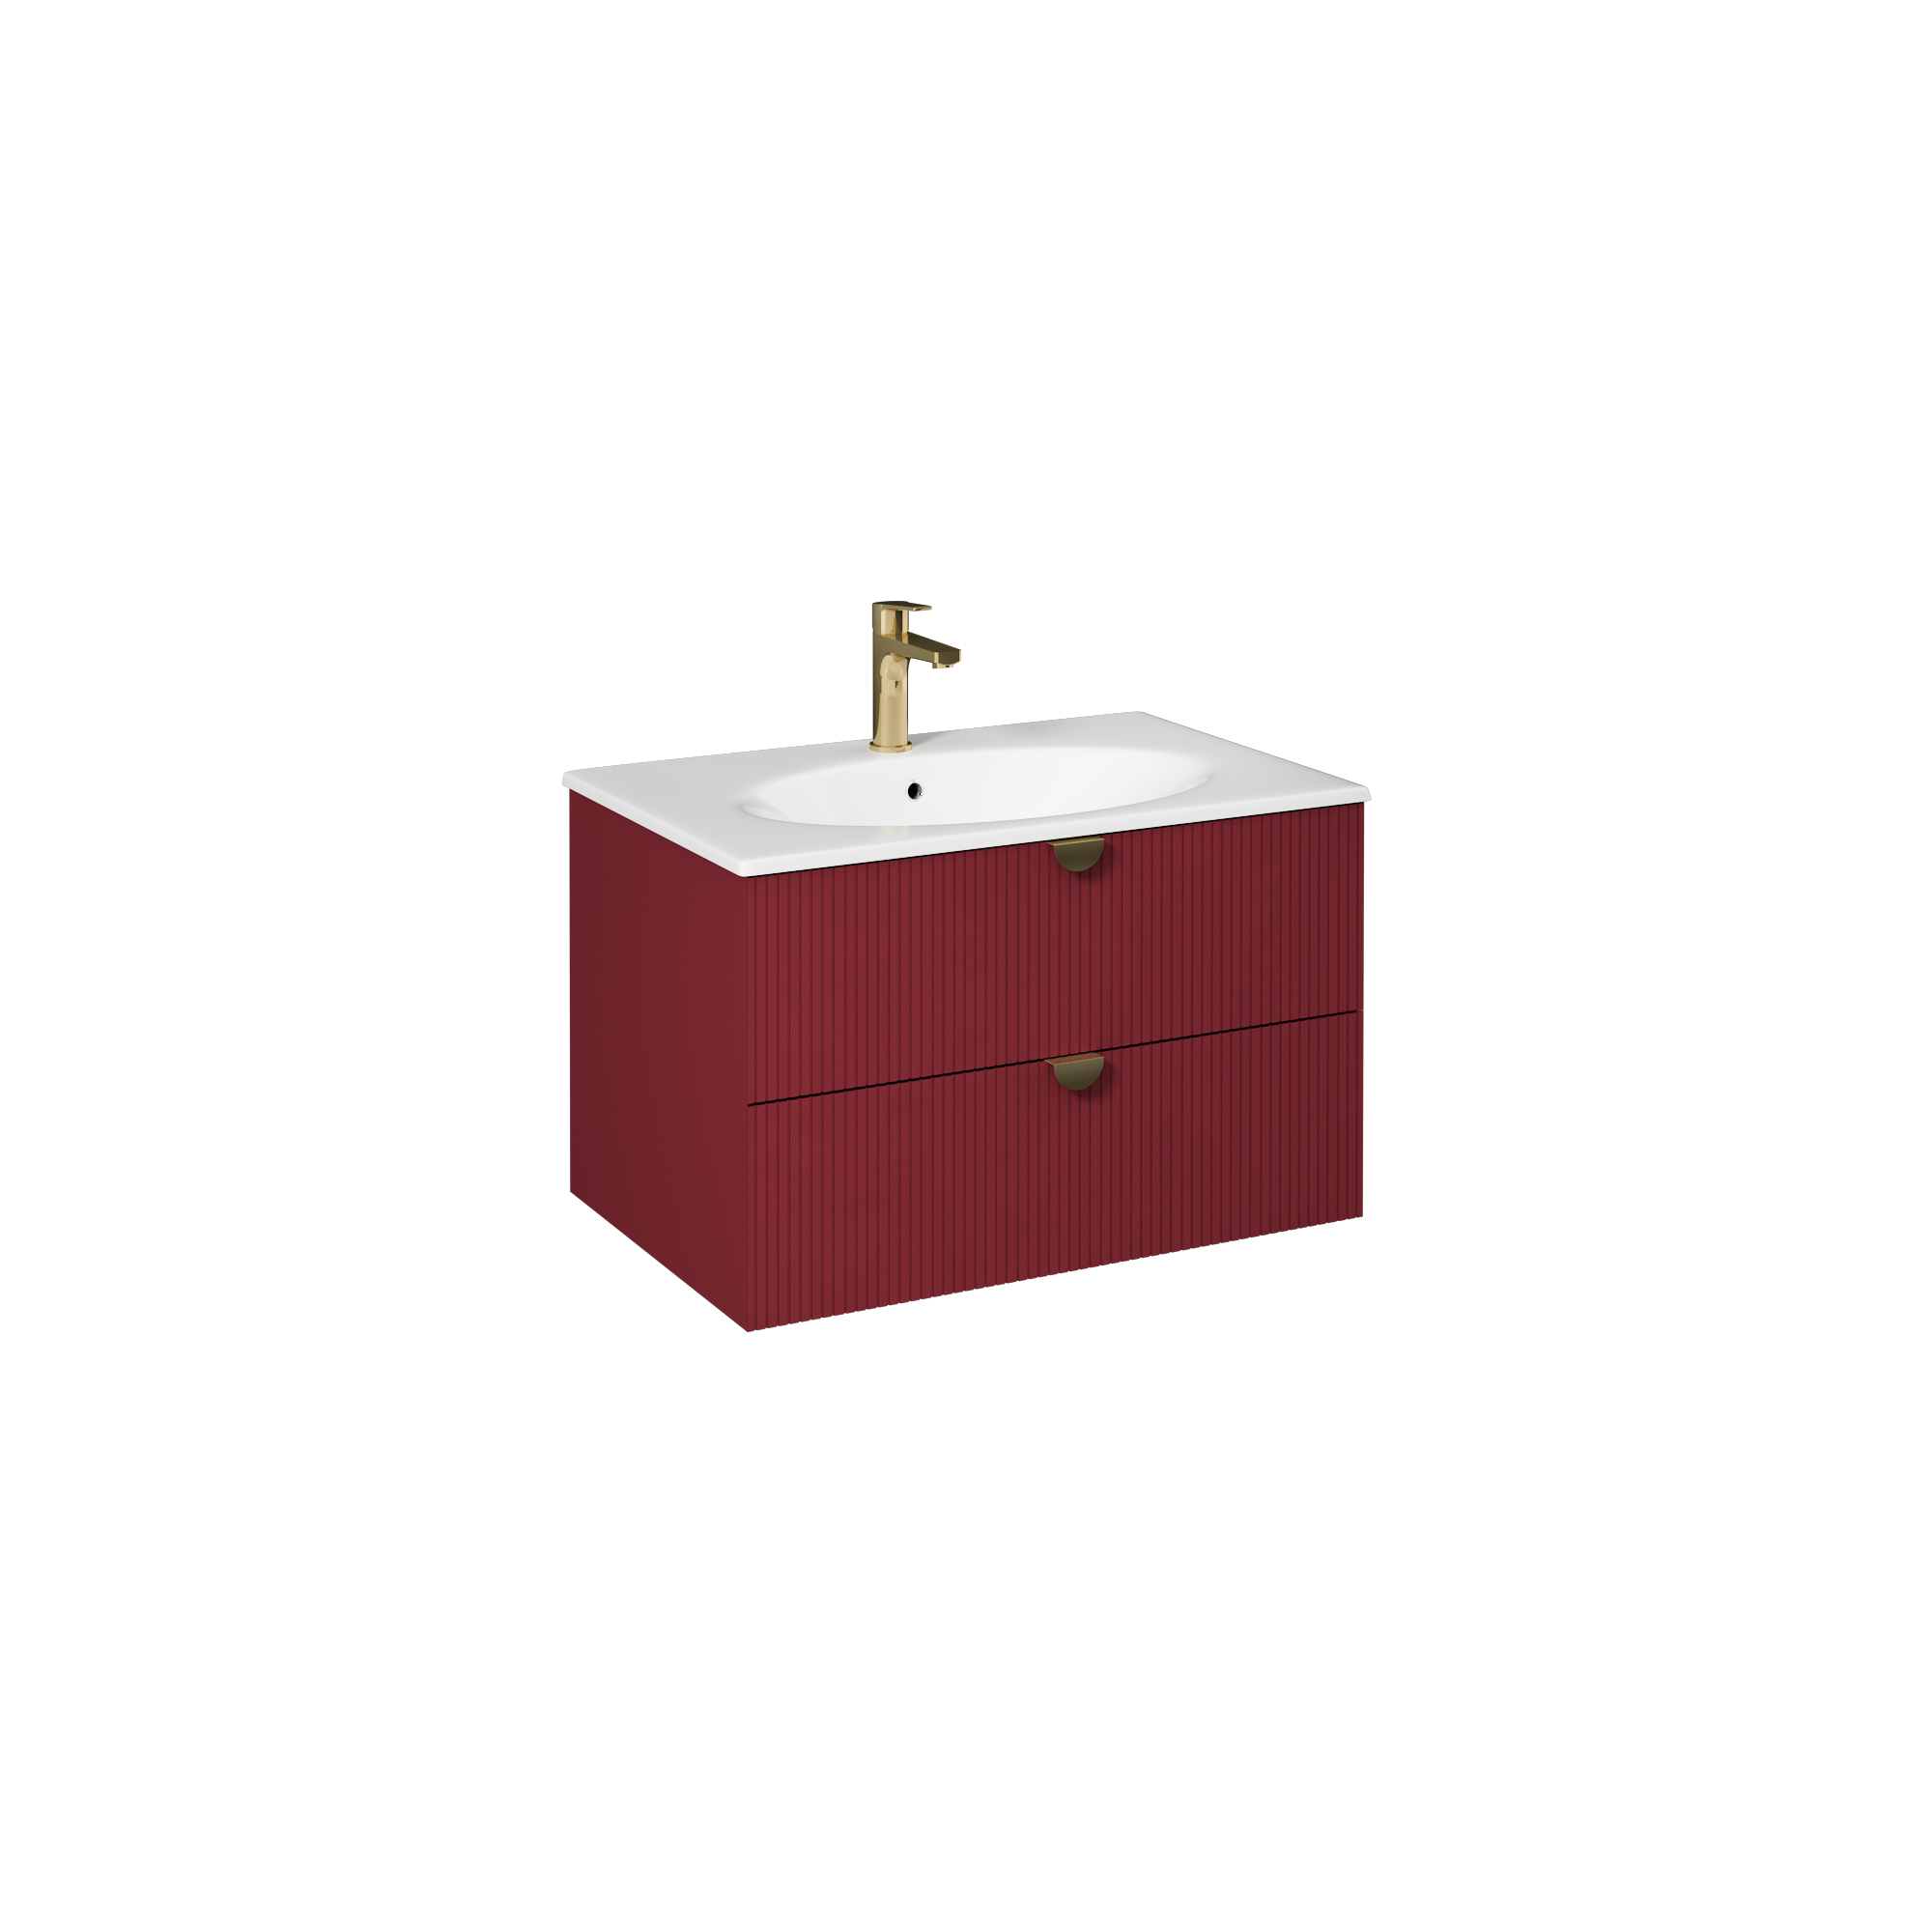 Infinity Washbasin Cabinet, Ruby Red 80 cm